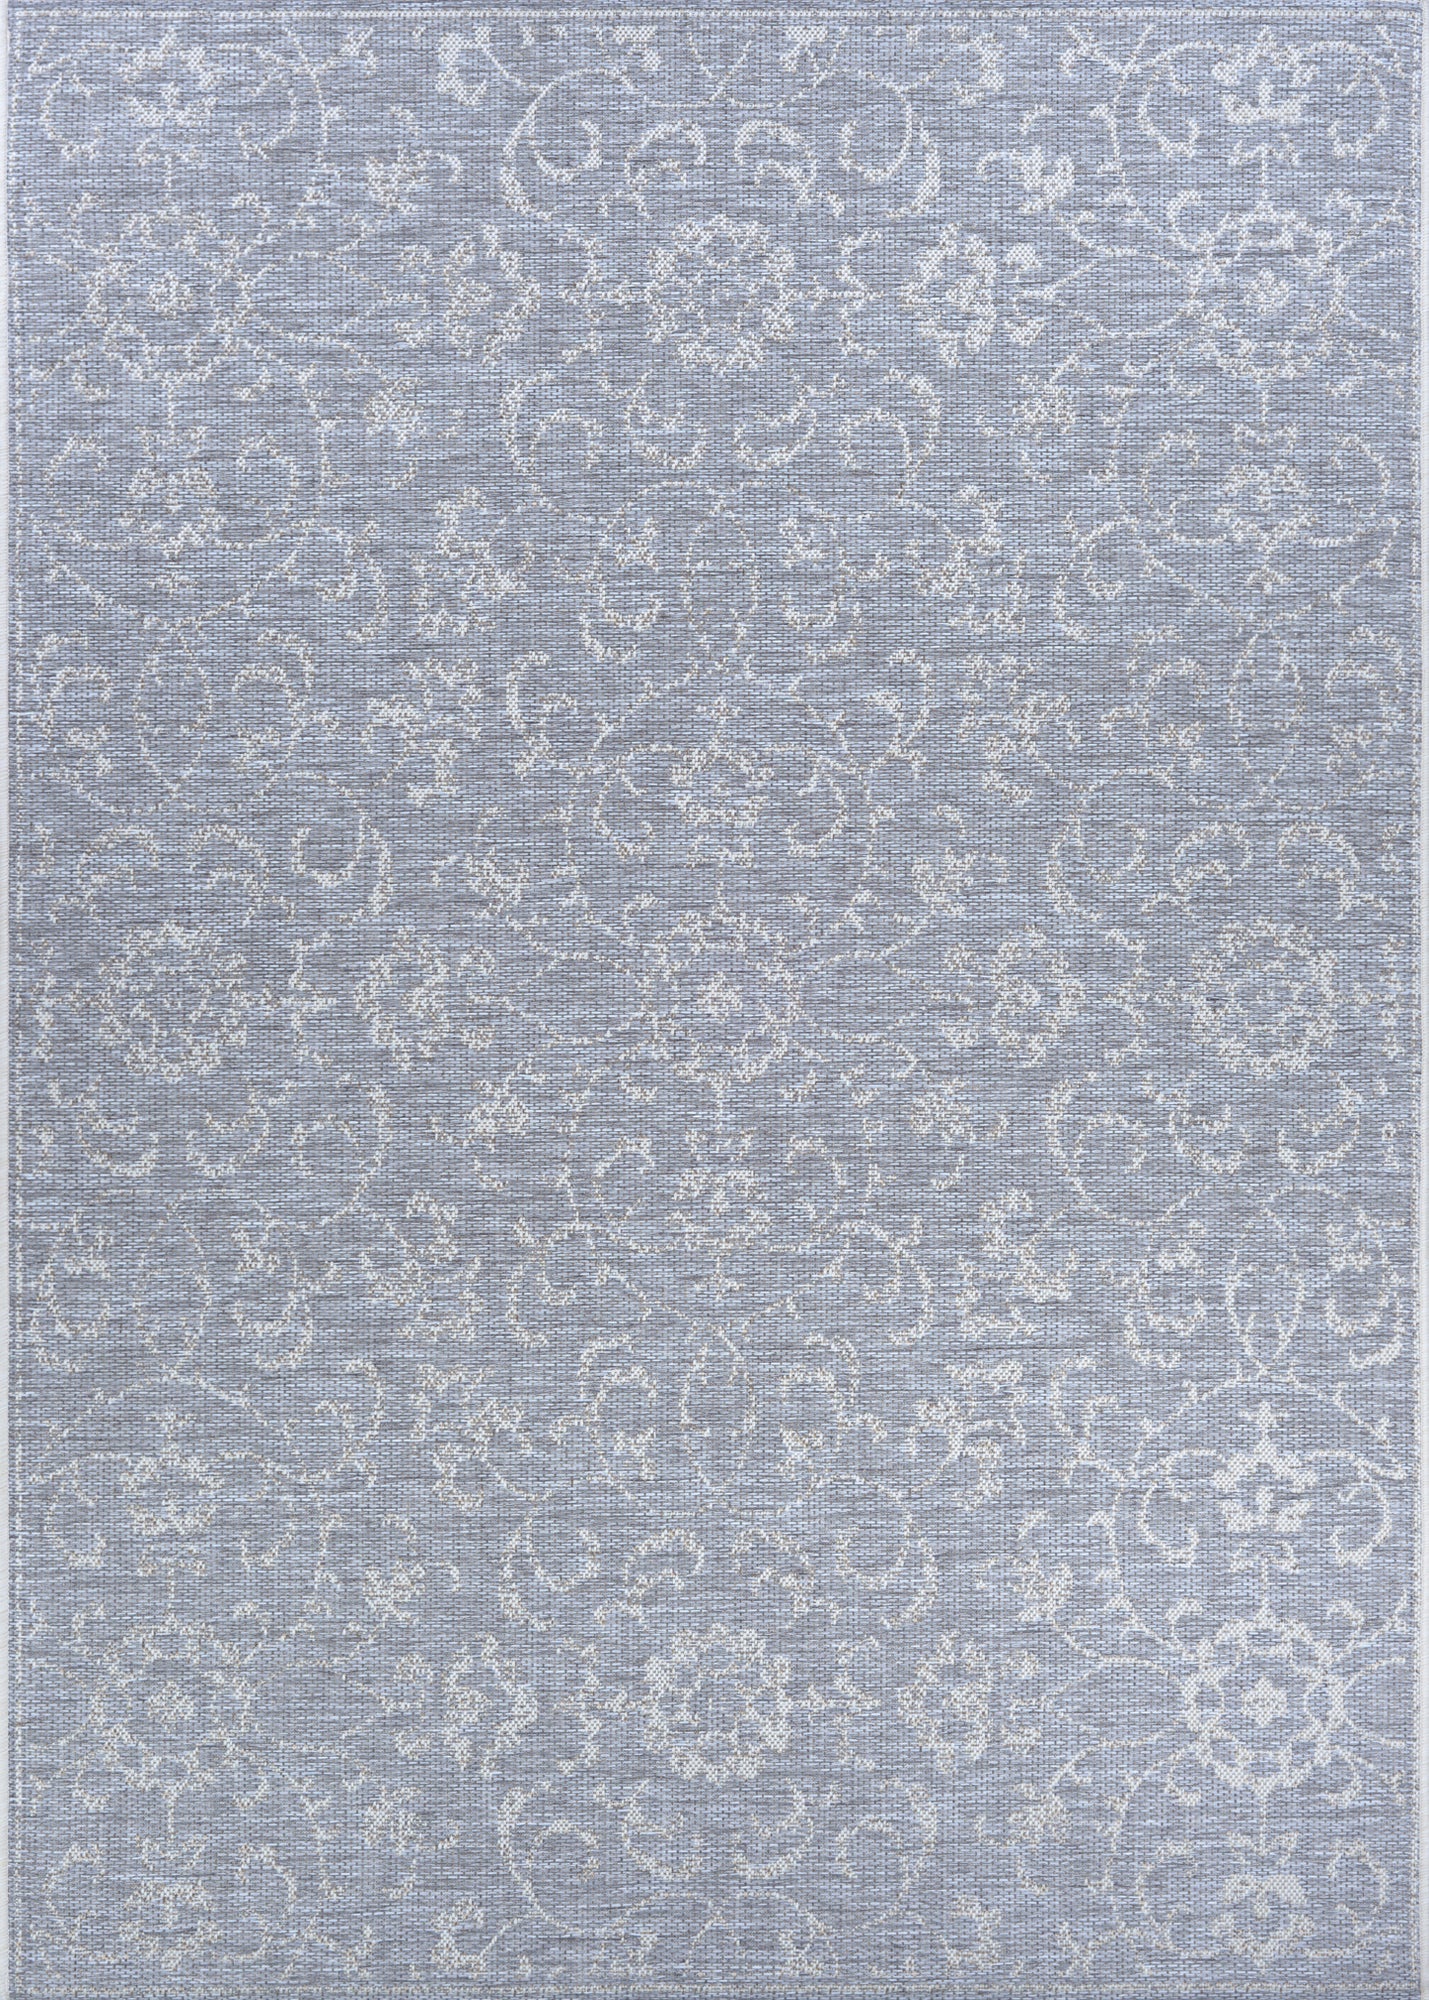 Couristan Monte Carlo Summer Vines Pewter/Ivory Area Rug main image